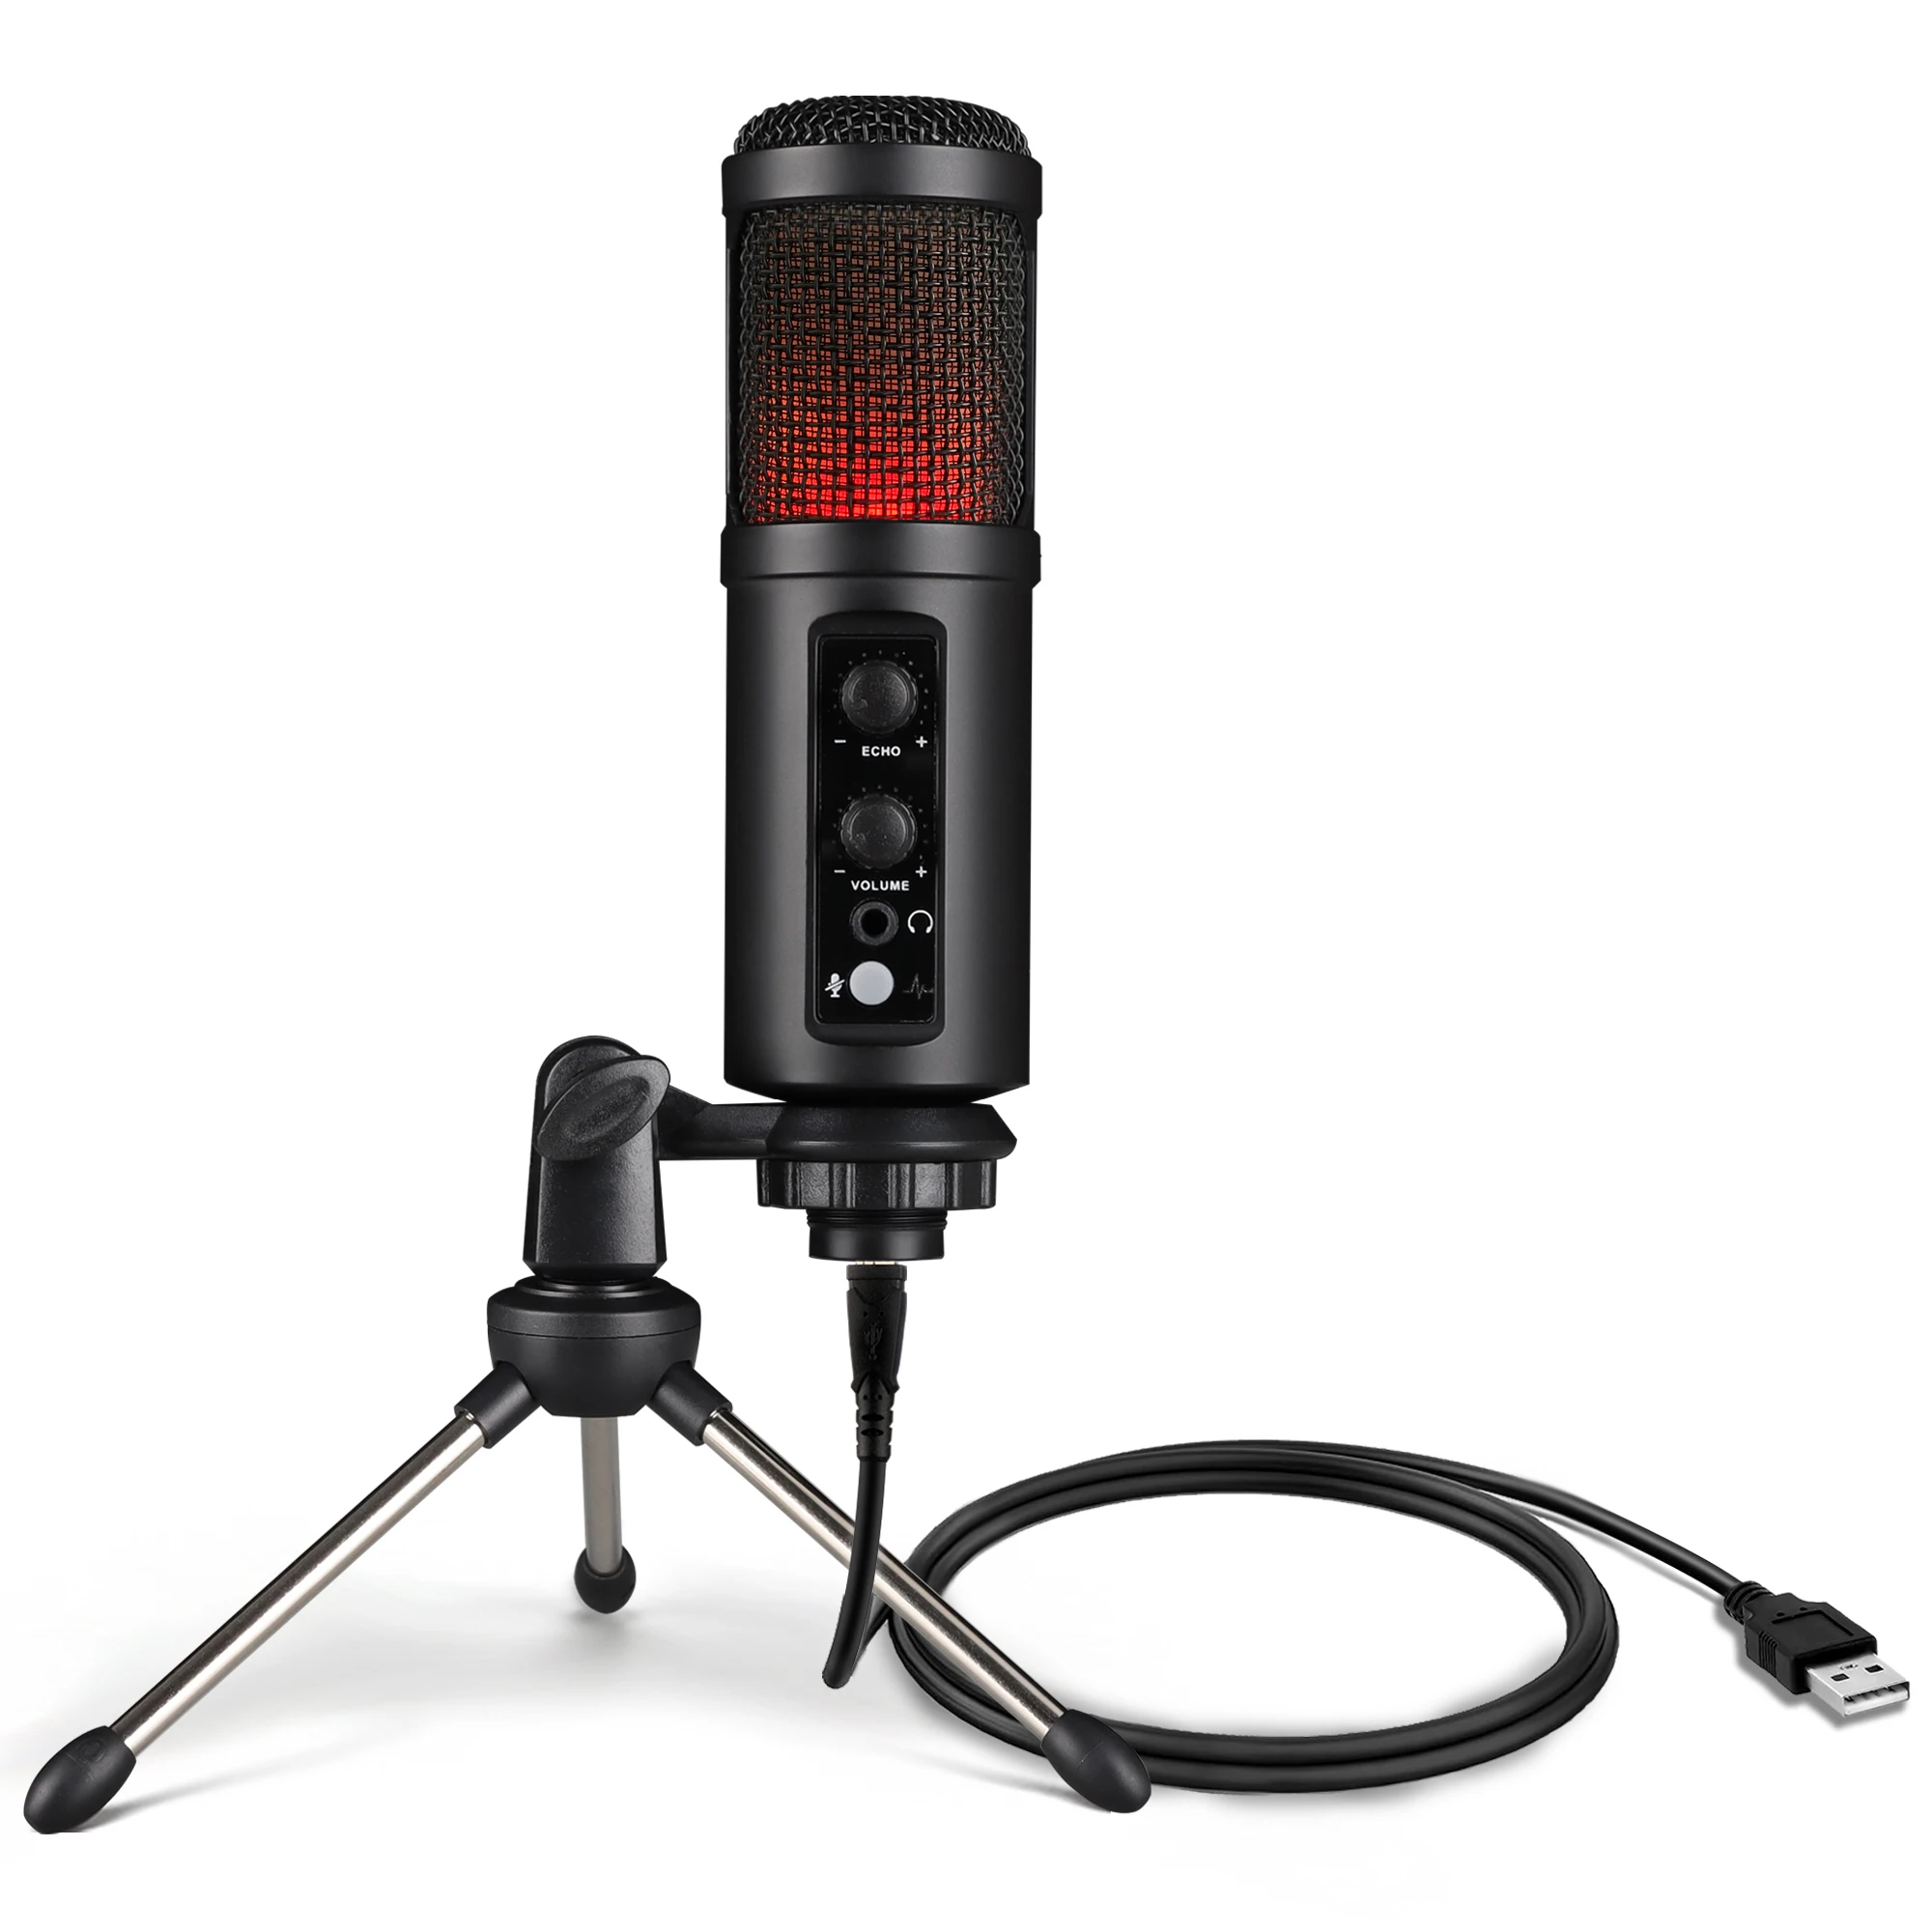 USB Microphone for Computer Gaming,Condense Mic with Echo and Monitoring, for PC Laptop Studio Recording Streaming,Plug and Play images - 6